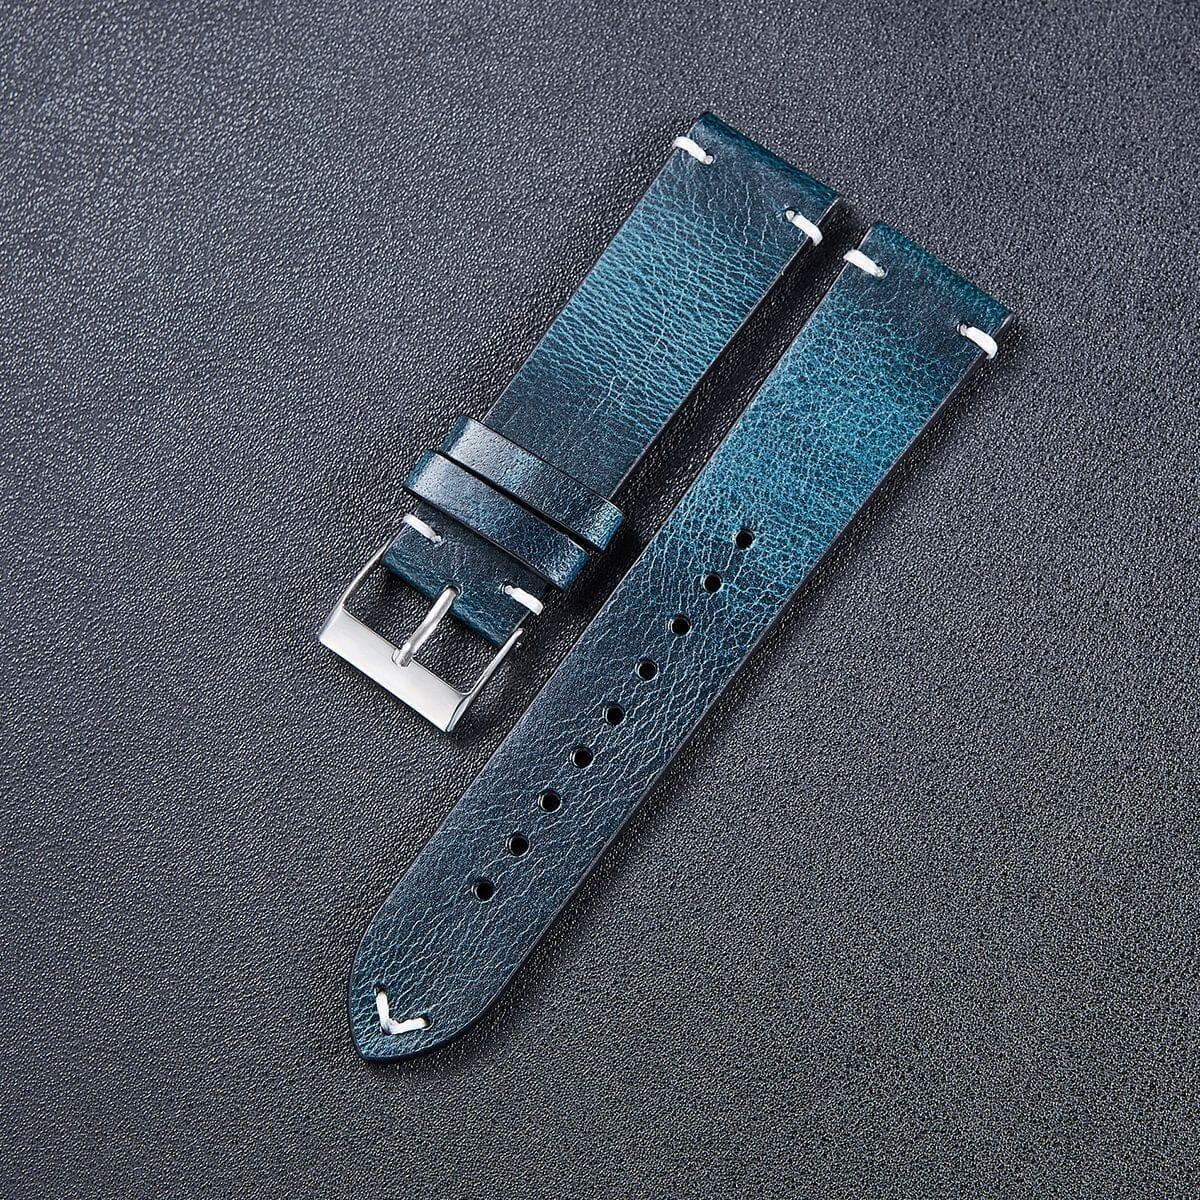 Vintage Oiled Leather Watch Straps Compatible with the Suunto 7 & D5